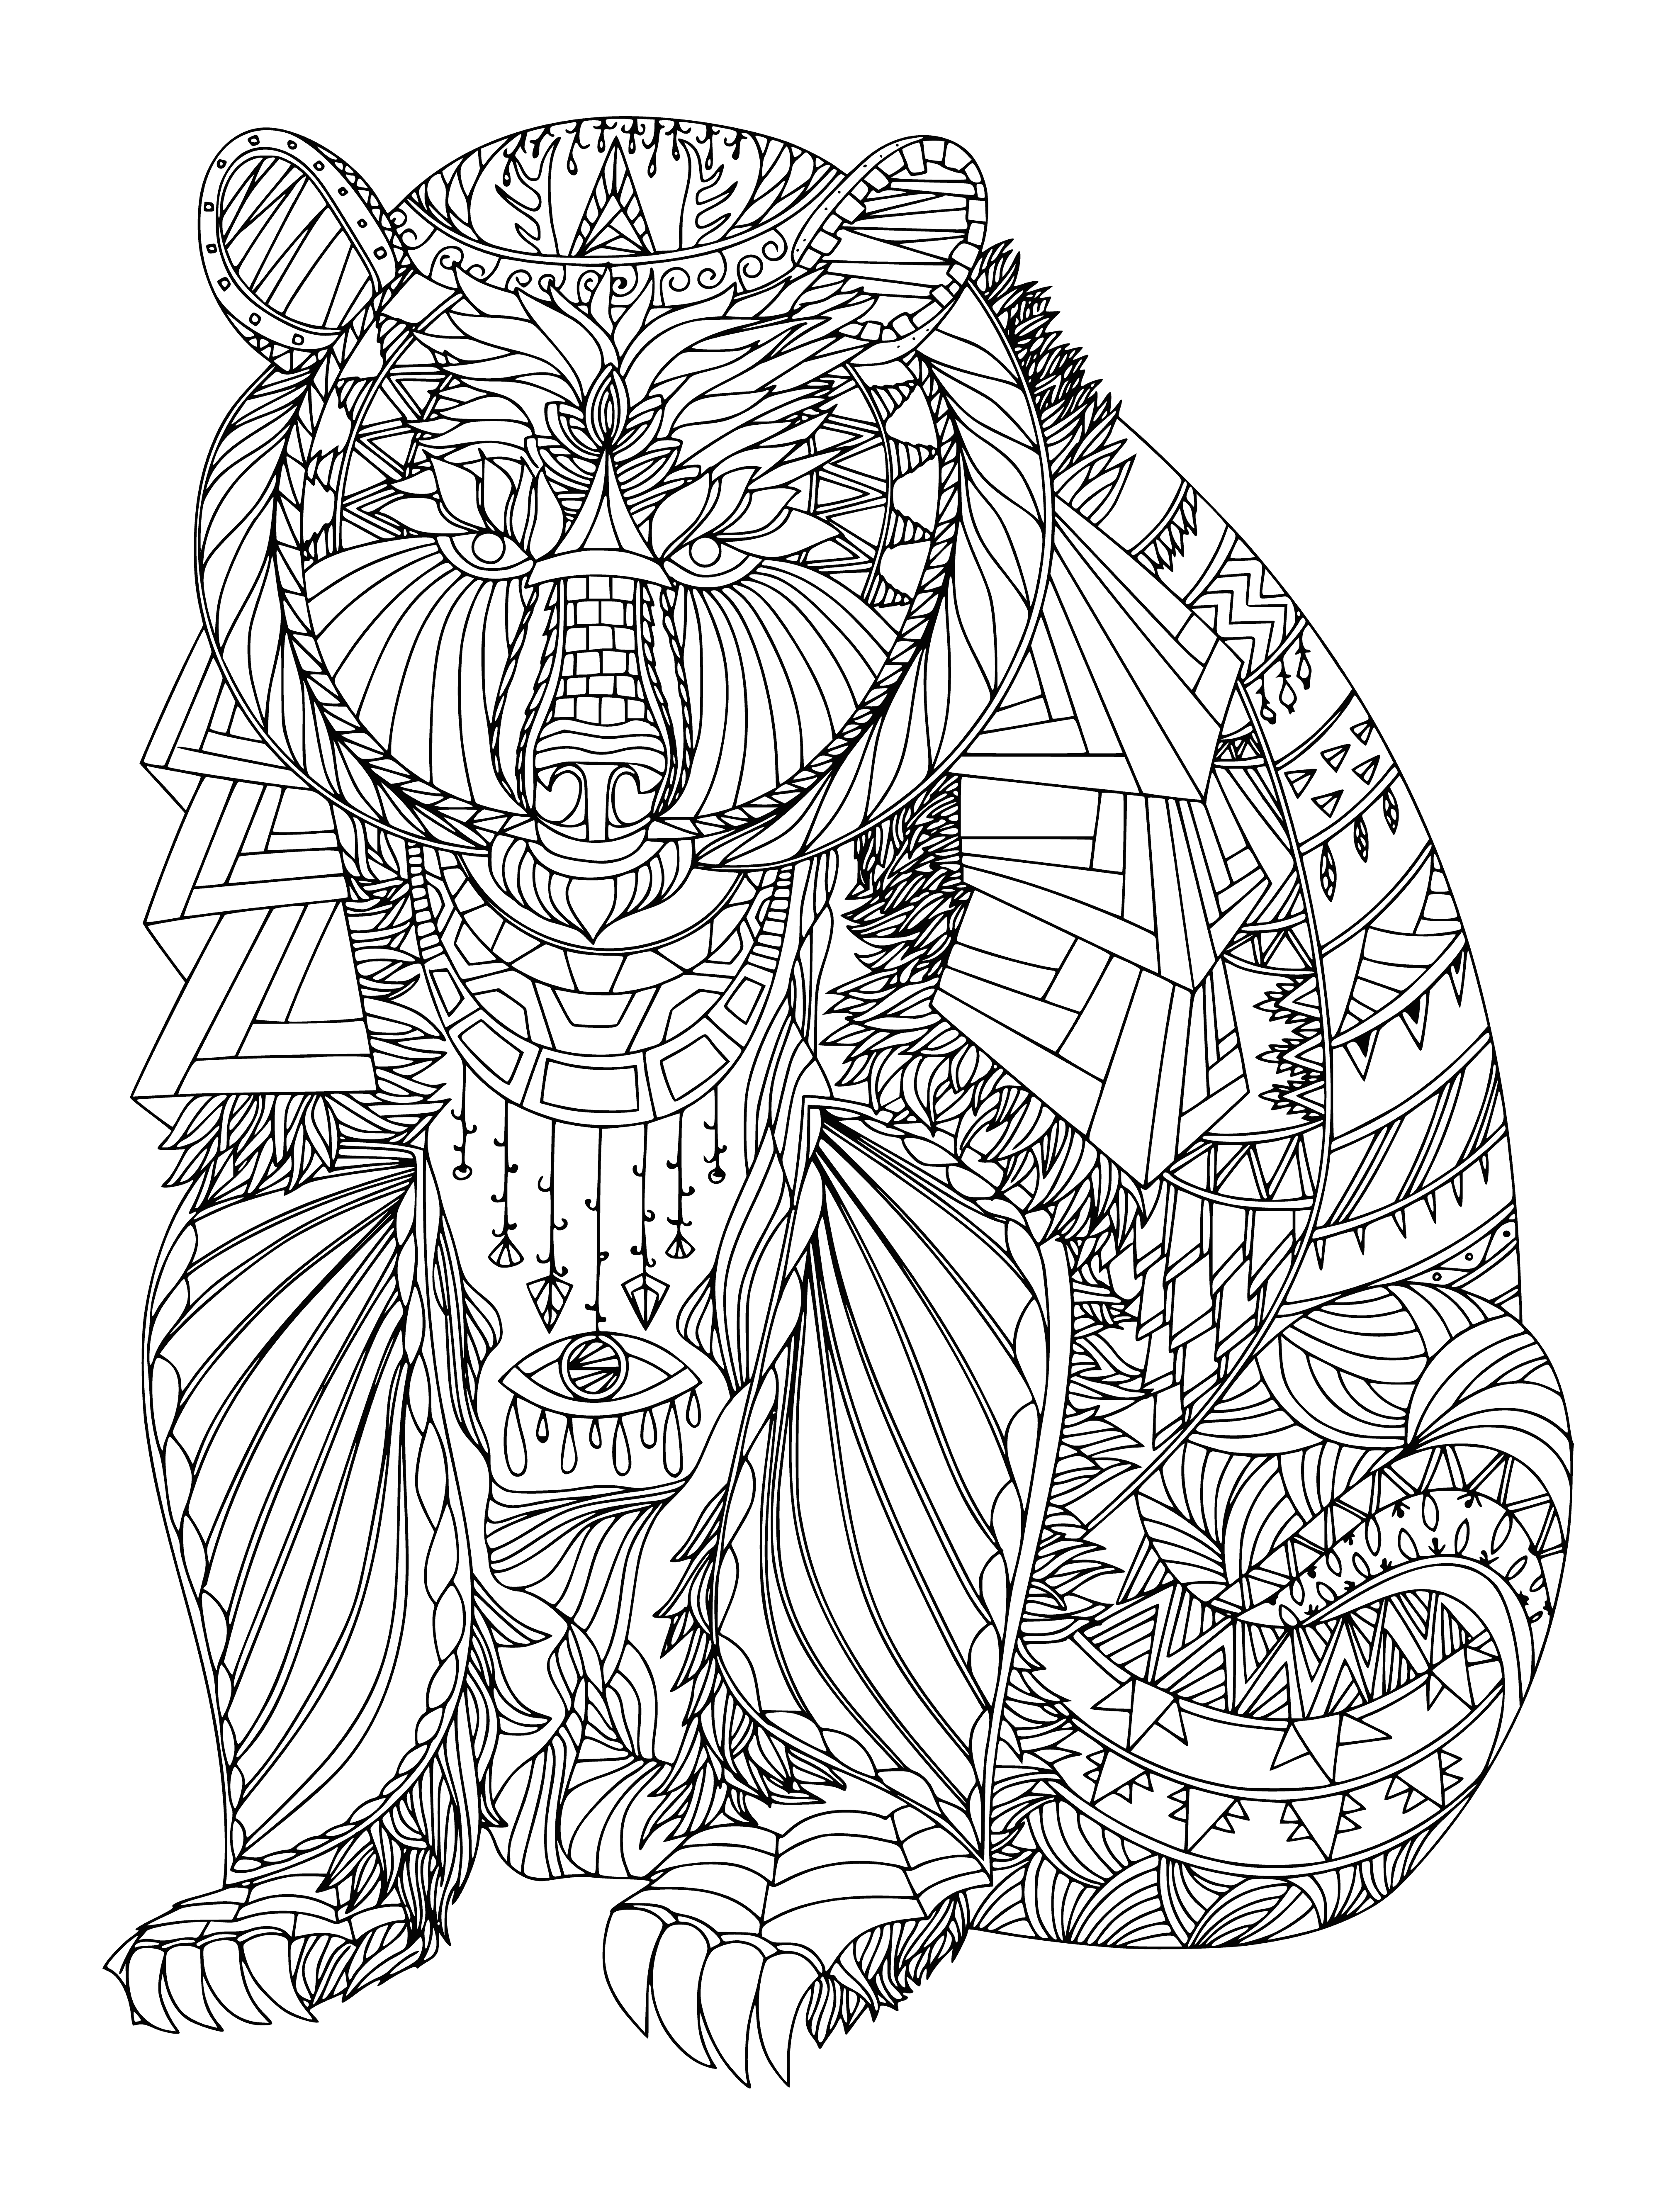 coloring page: Happy bear surrounded by calming animals in a soft coloring page perfect for relaxation and destressing.